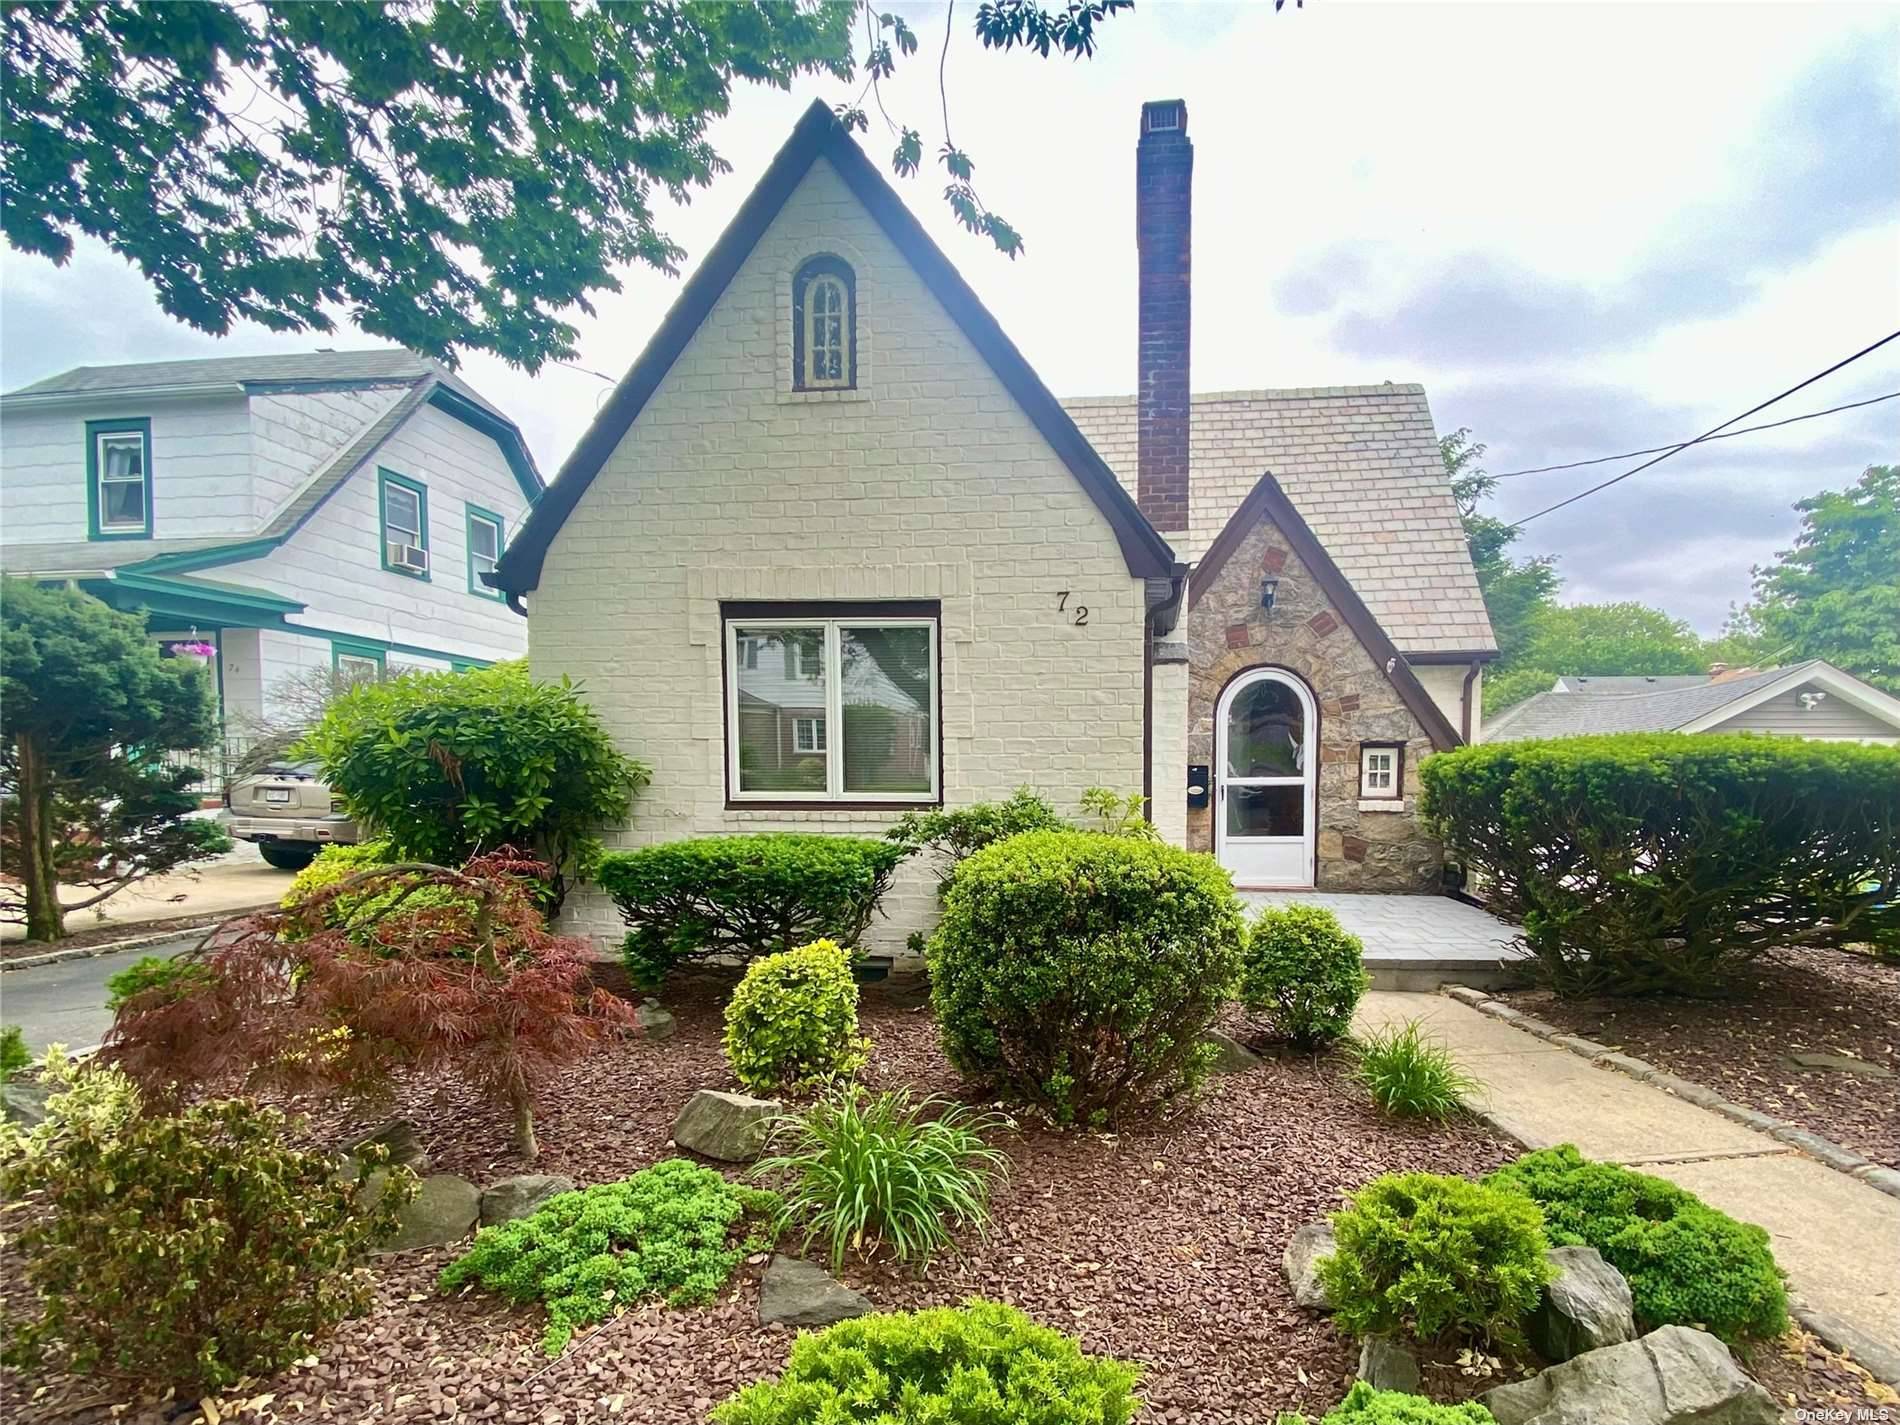 Classic tudor cape style home located in the West End Section of The Village of Floral Park.